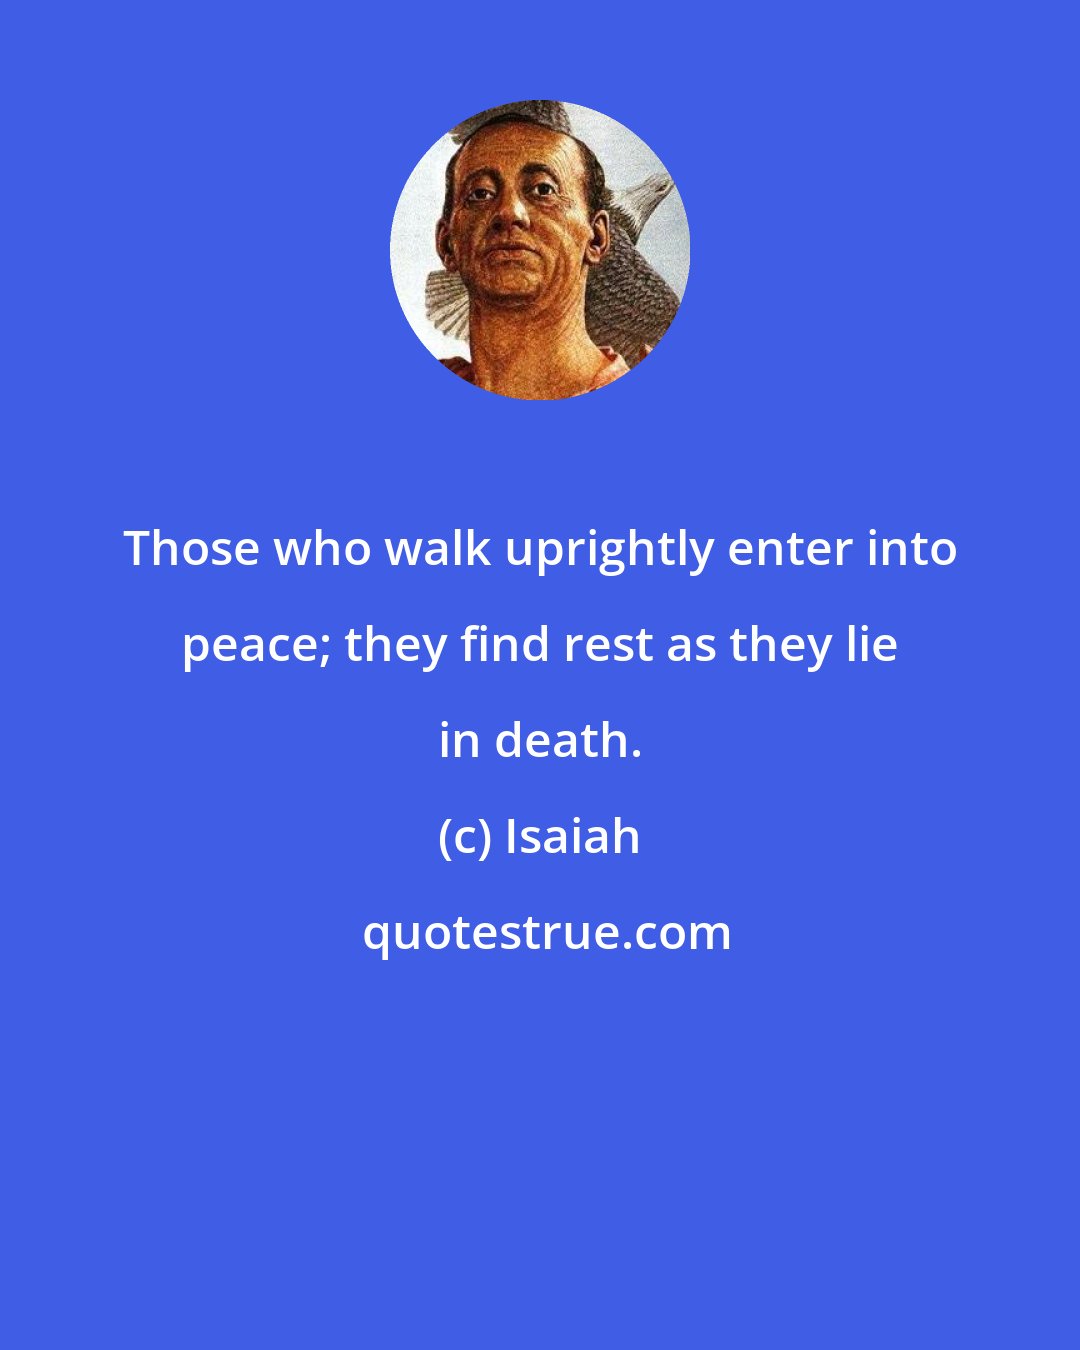 Isaiah: Those who walk uprightly enter into peace; they find rest as they lie in death.